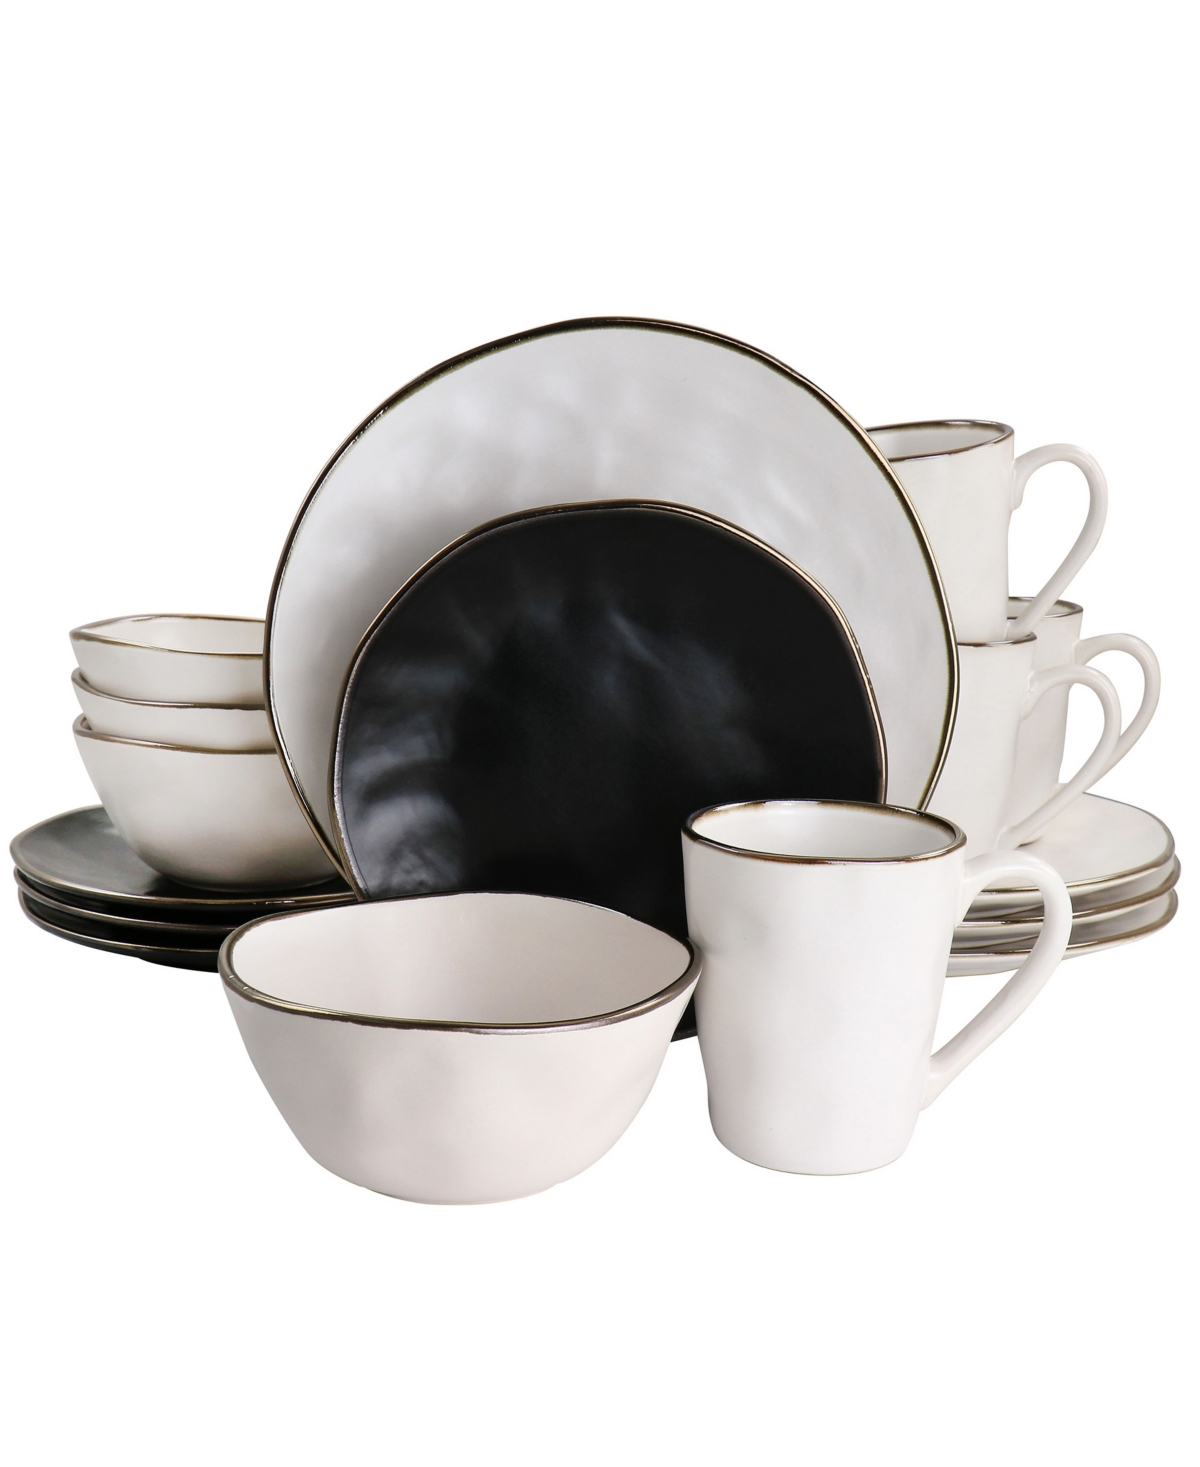 Andres Mixed 16 Pc. Stoneware Dinnerware Set, Service for 4 - Assorted Matte with Gold-Tone Rim